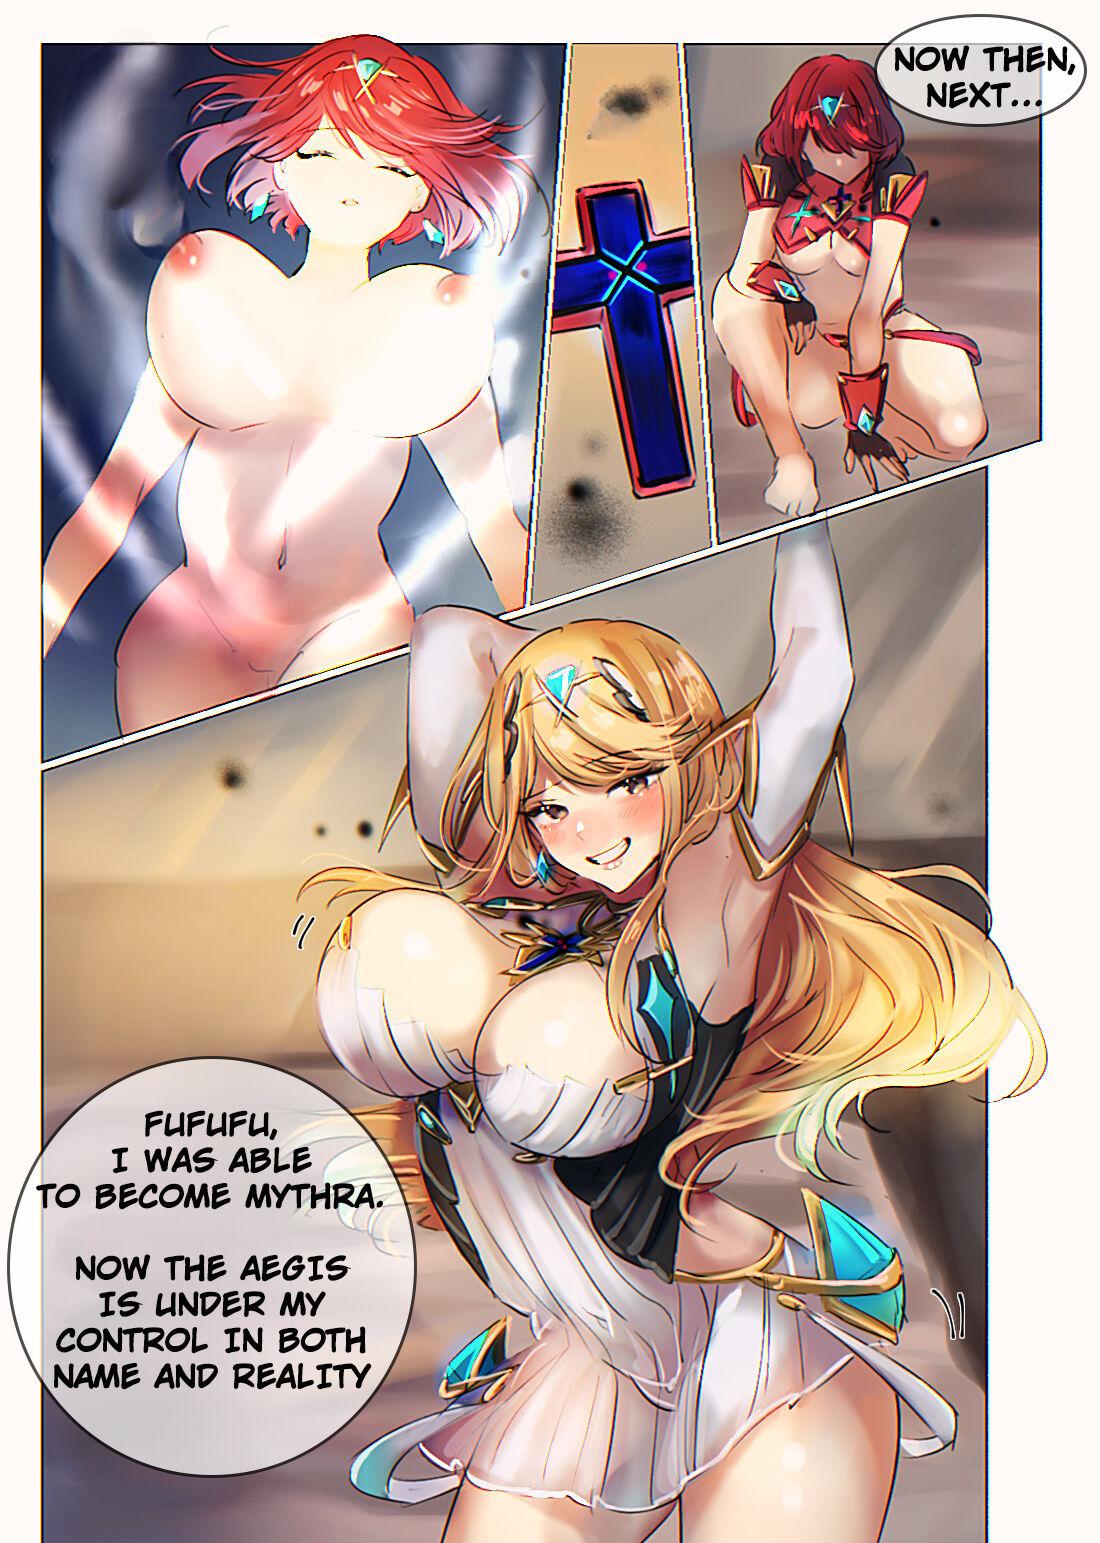 Fun Possessing Pyra and Mythra - Xenoblade chronicles 2 Home - Page 10